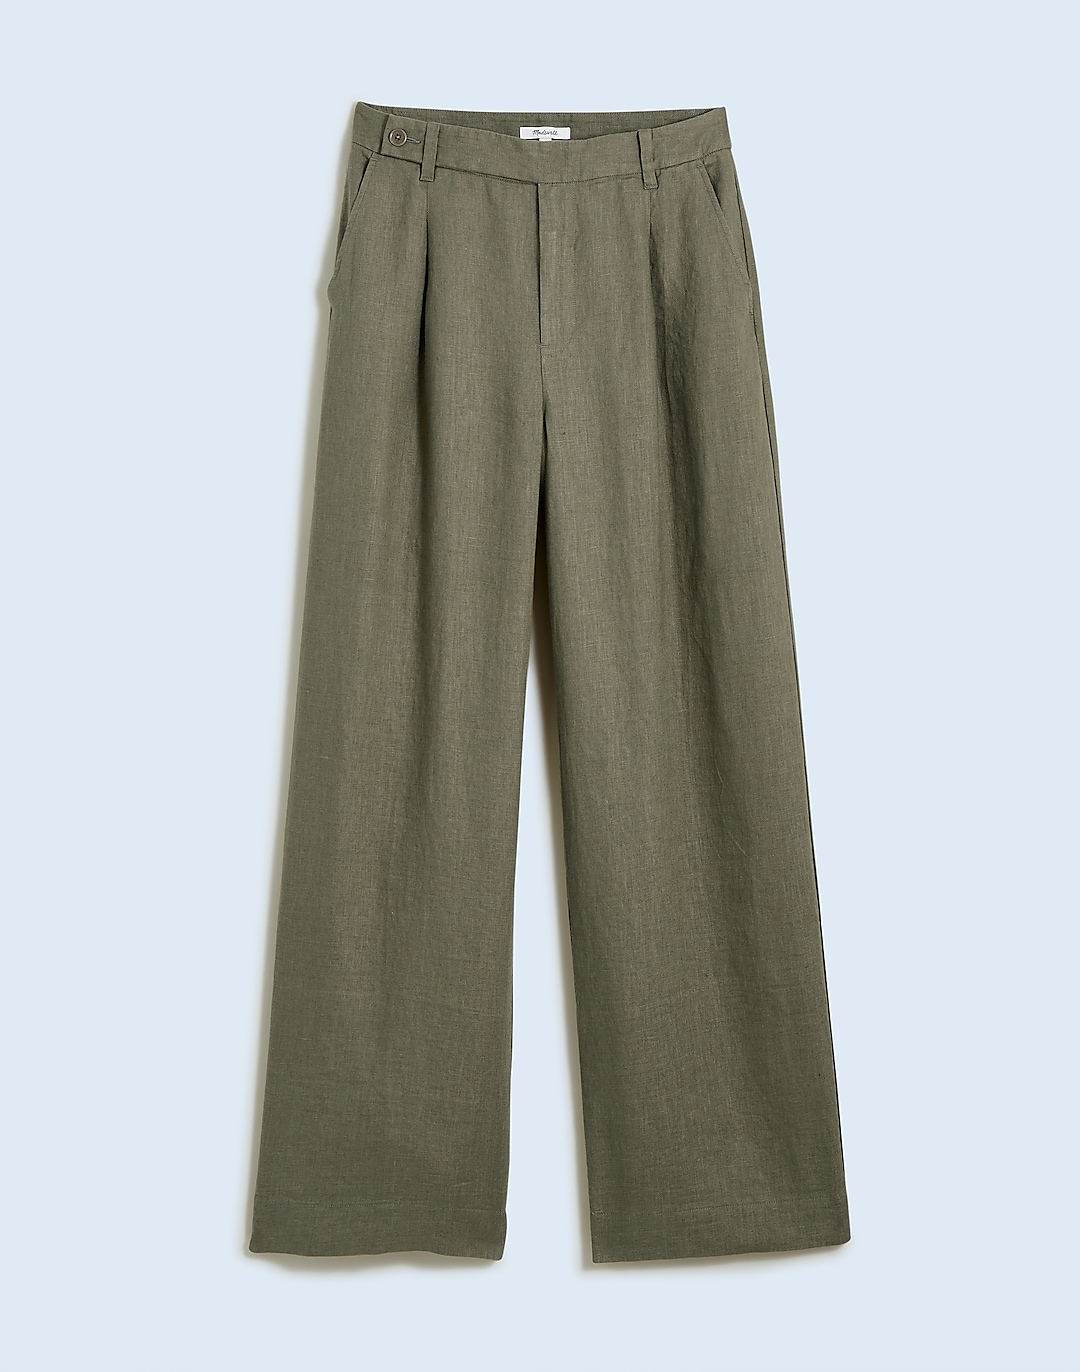 The Plus Harlow Wide-Leg Pant in 100% Linen | Madewell